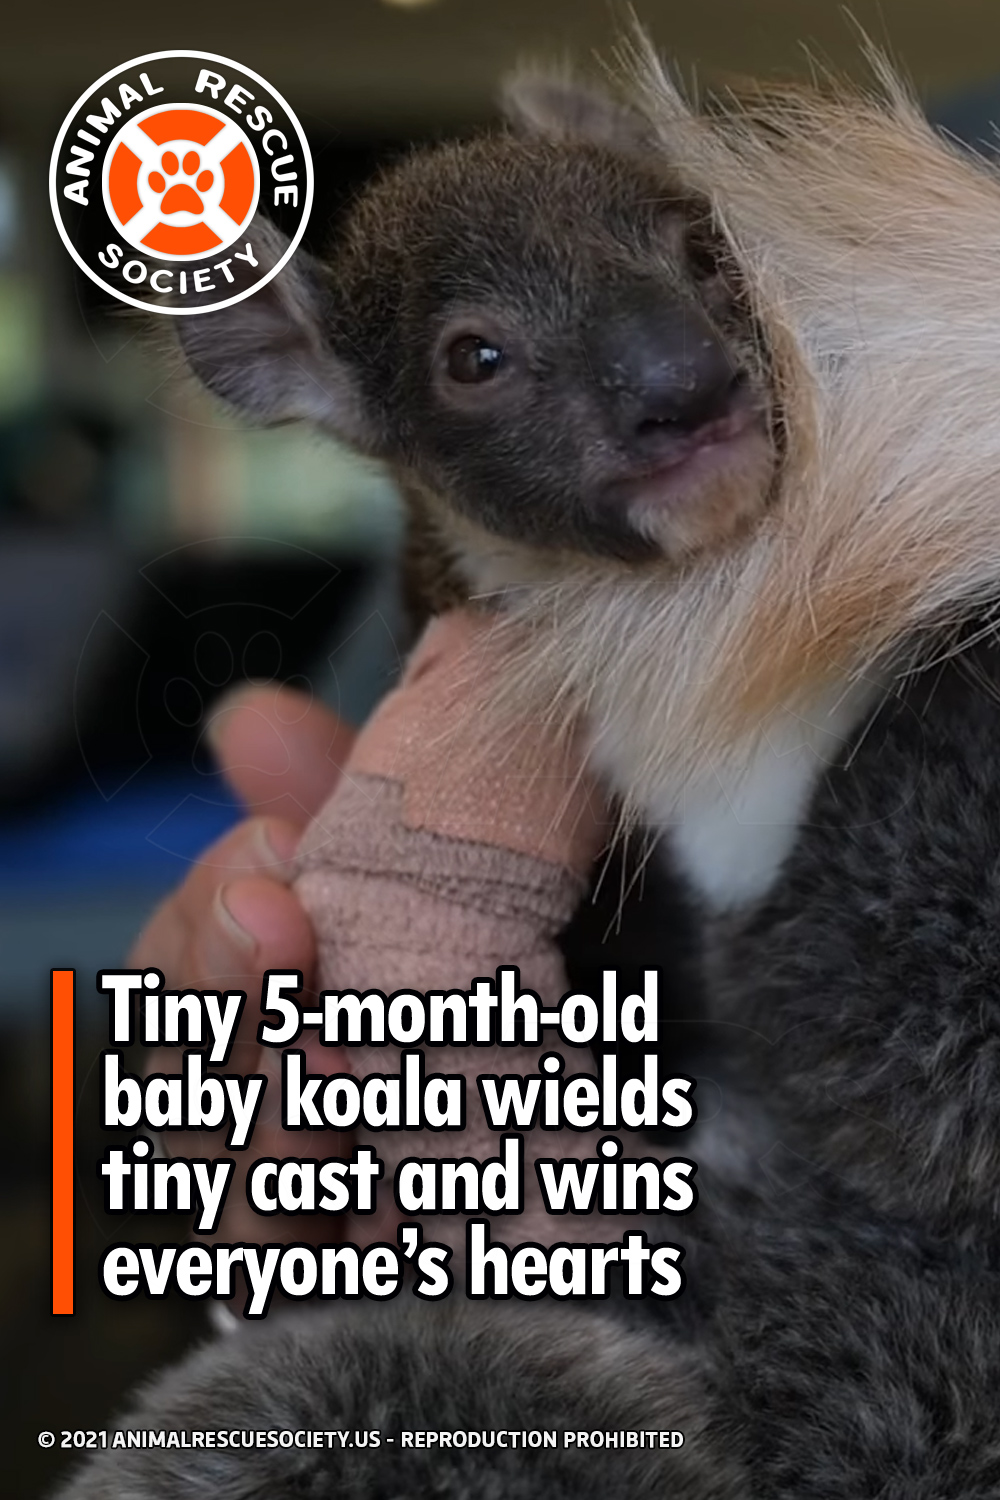 Tiny 5-month-old baby koala wields tiny cast and wins everyone’s hearts